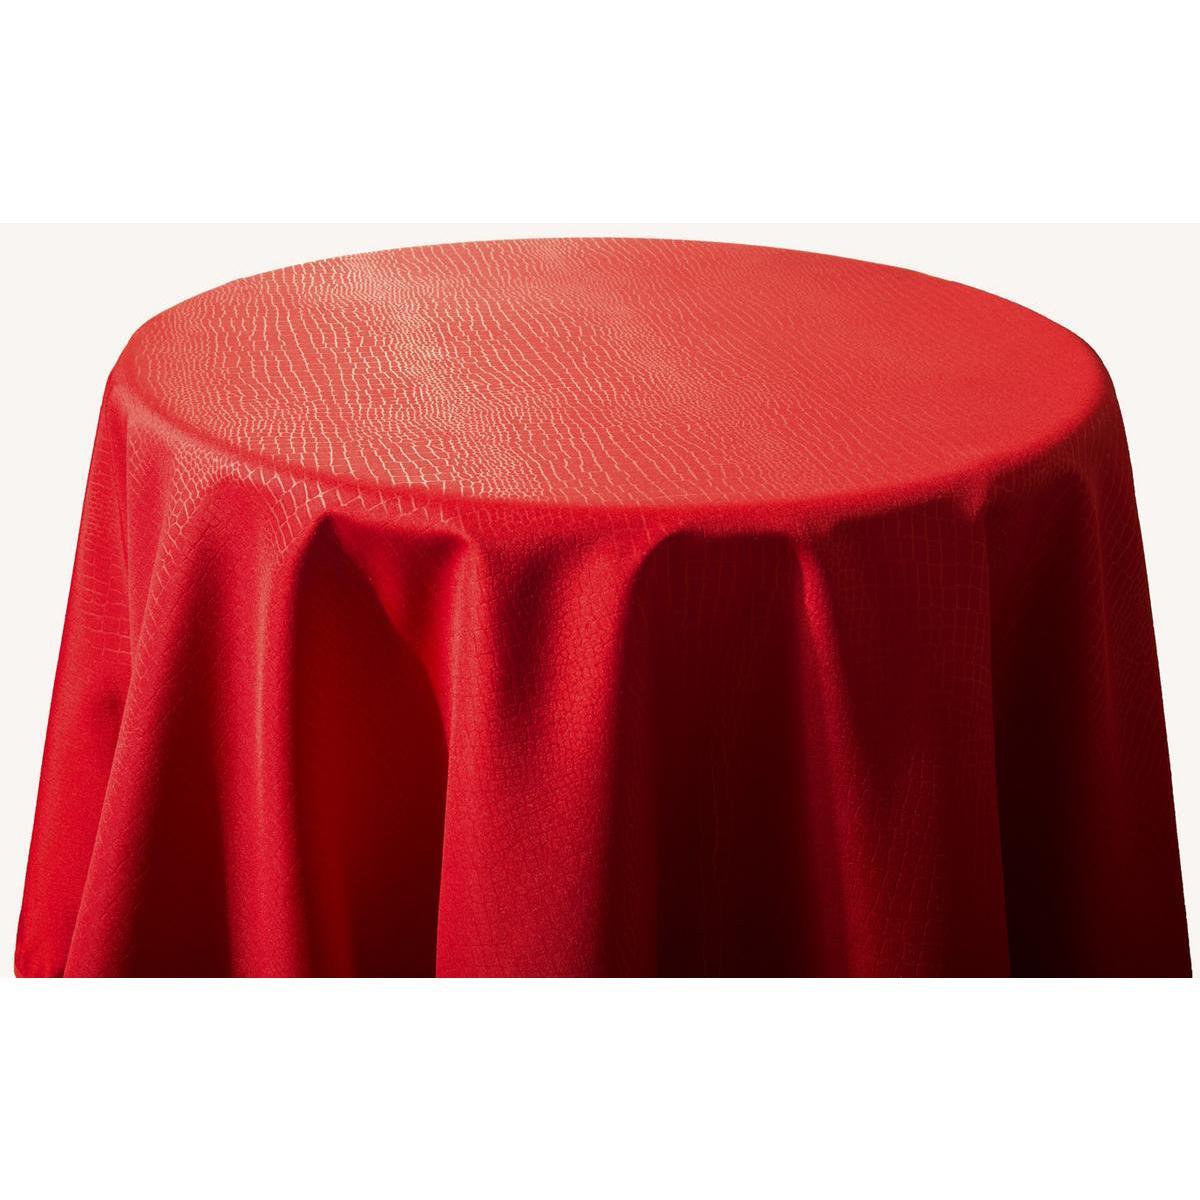 Nappe ronde effet croco - 100% Polyester - Ø 180 cm - Rouge